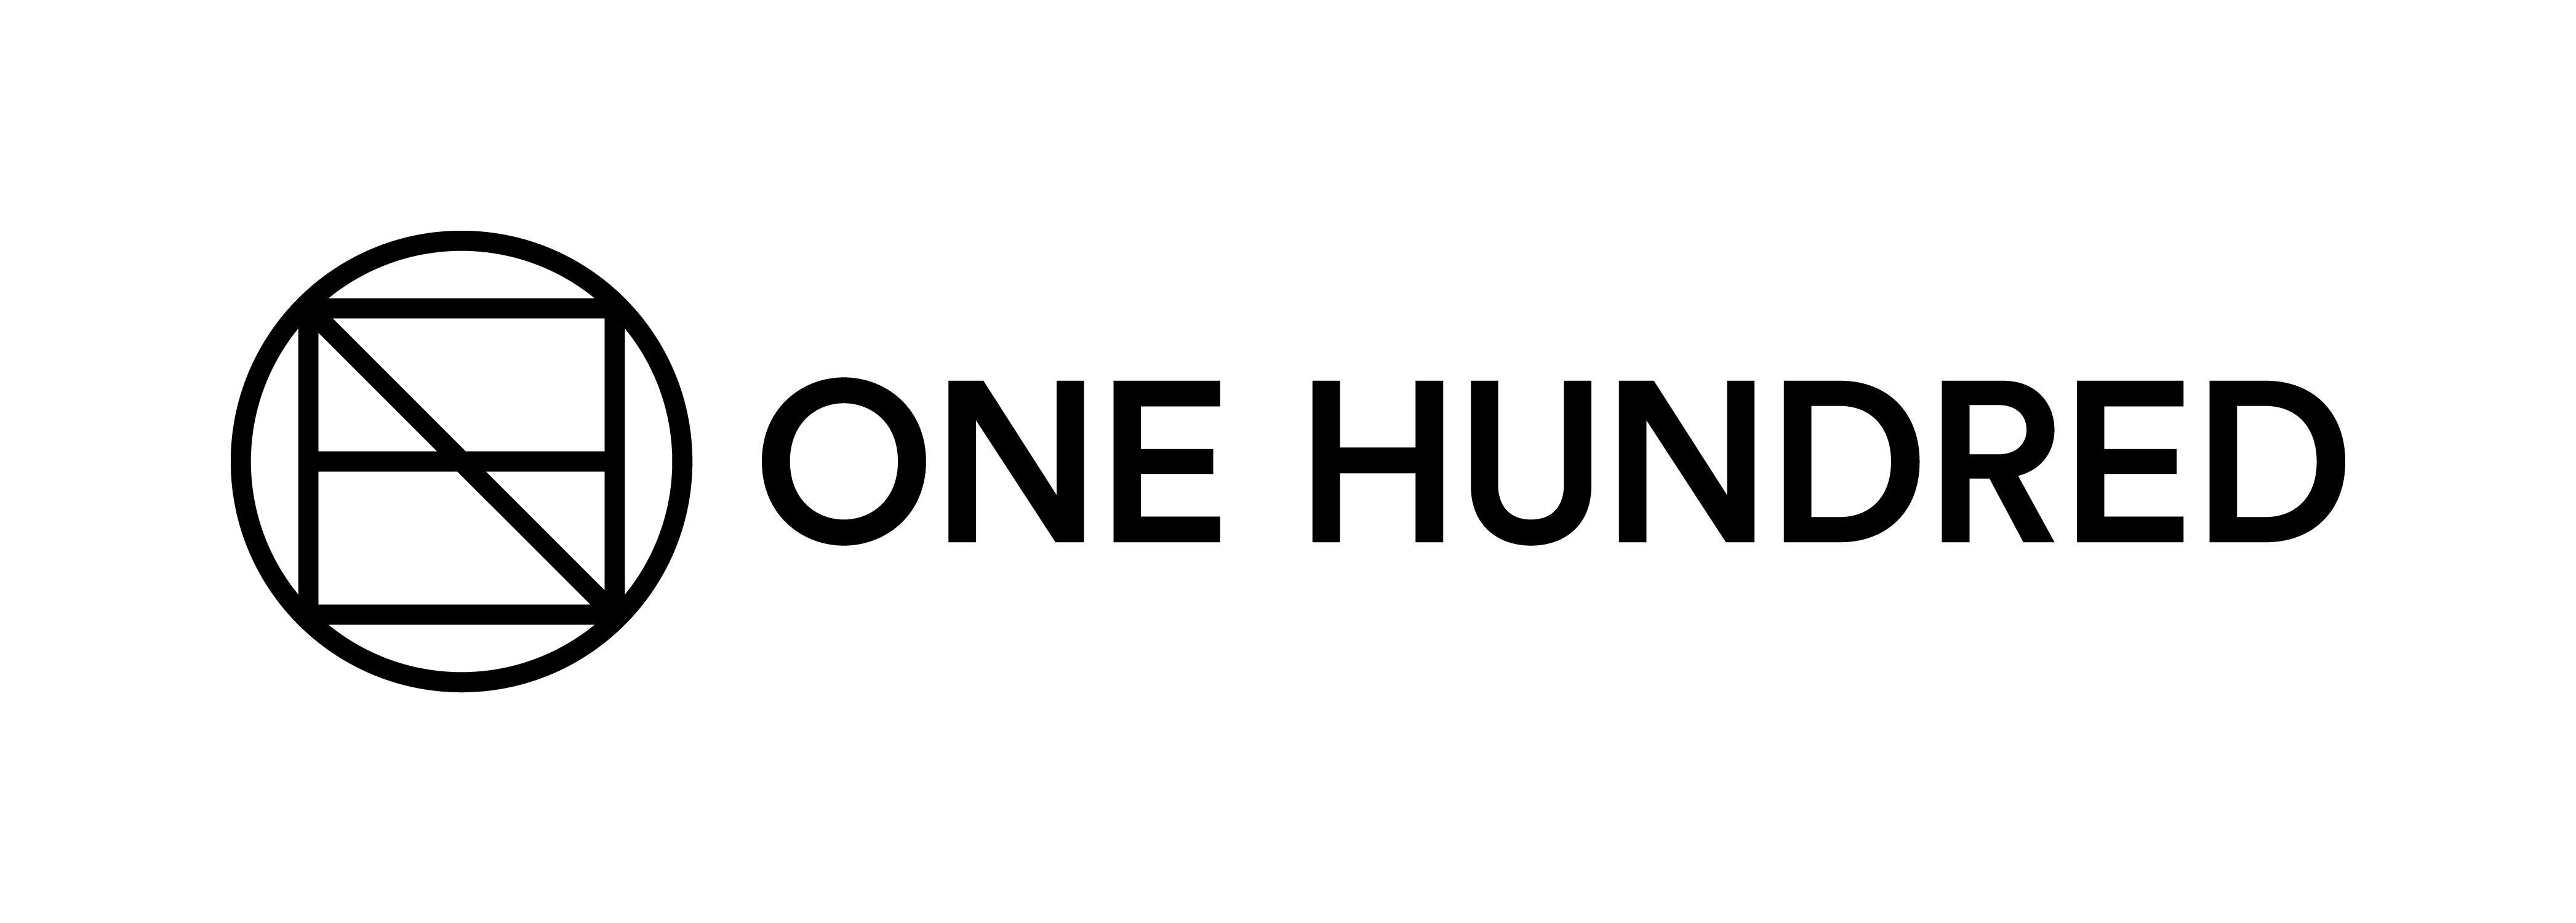 Omnicom Group Official Logo - The DAS Group of Companies Launches ONE HUNDRED | Omnicom Group